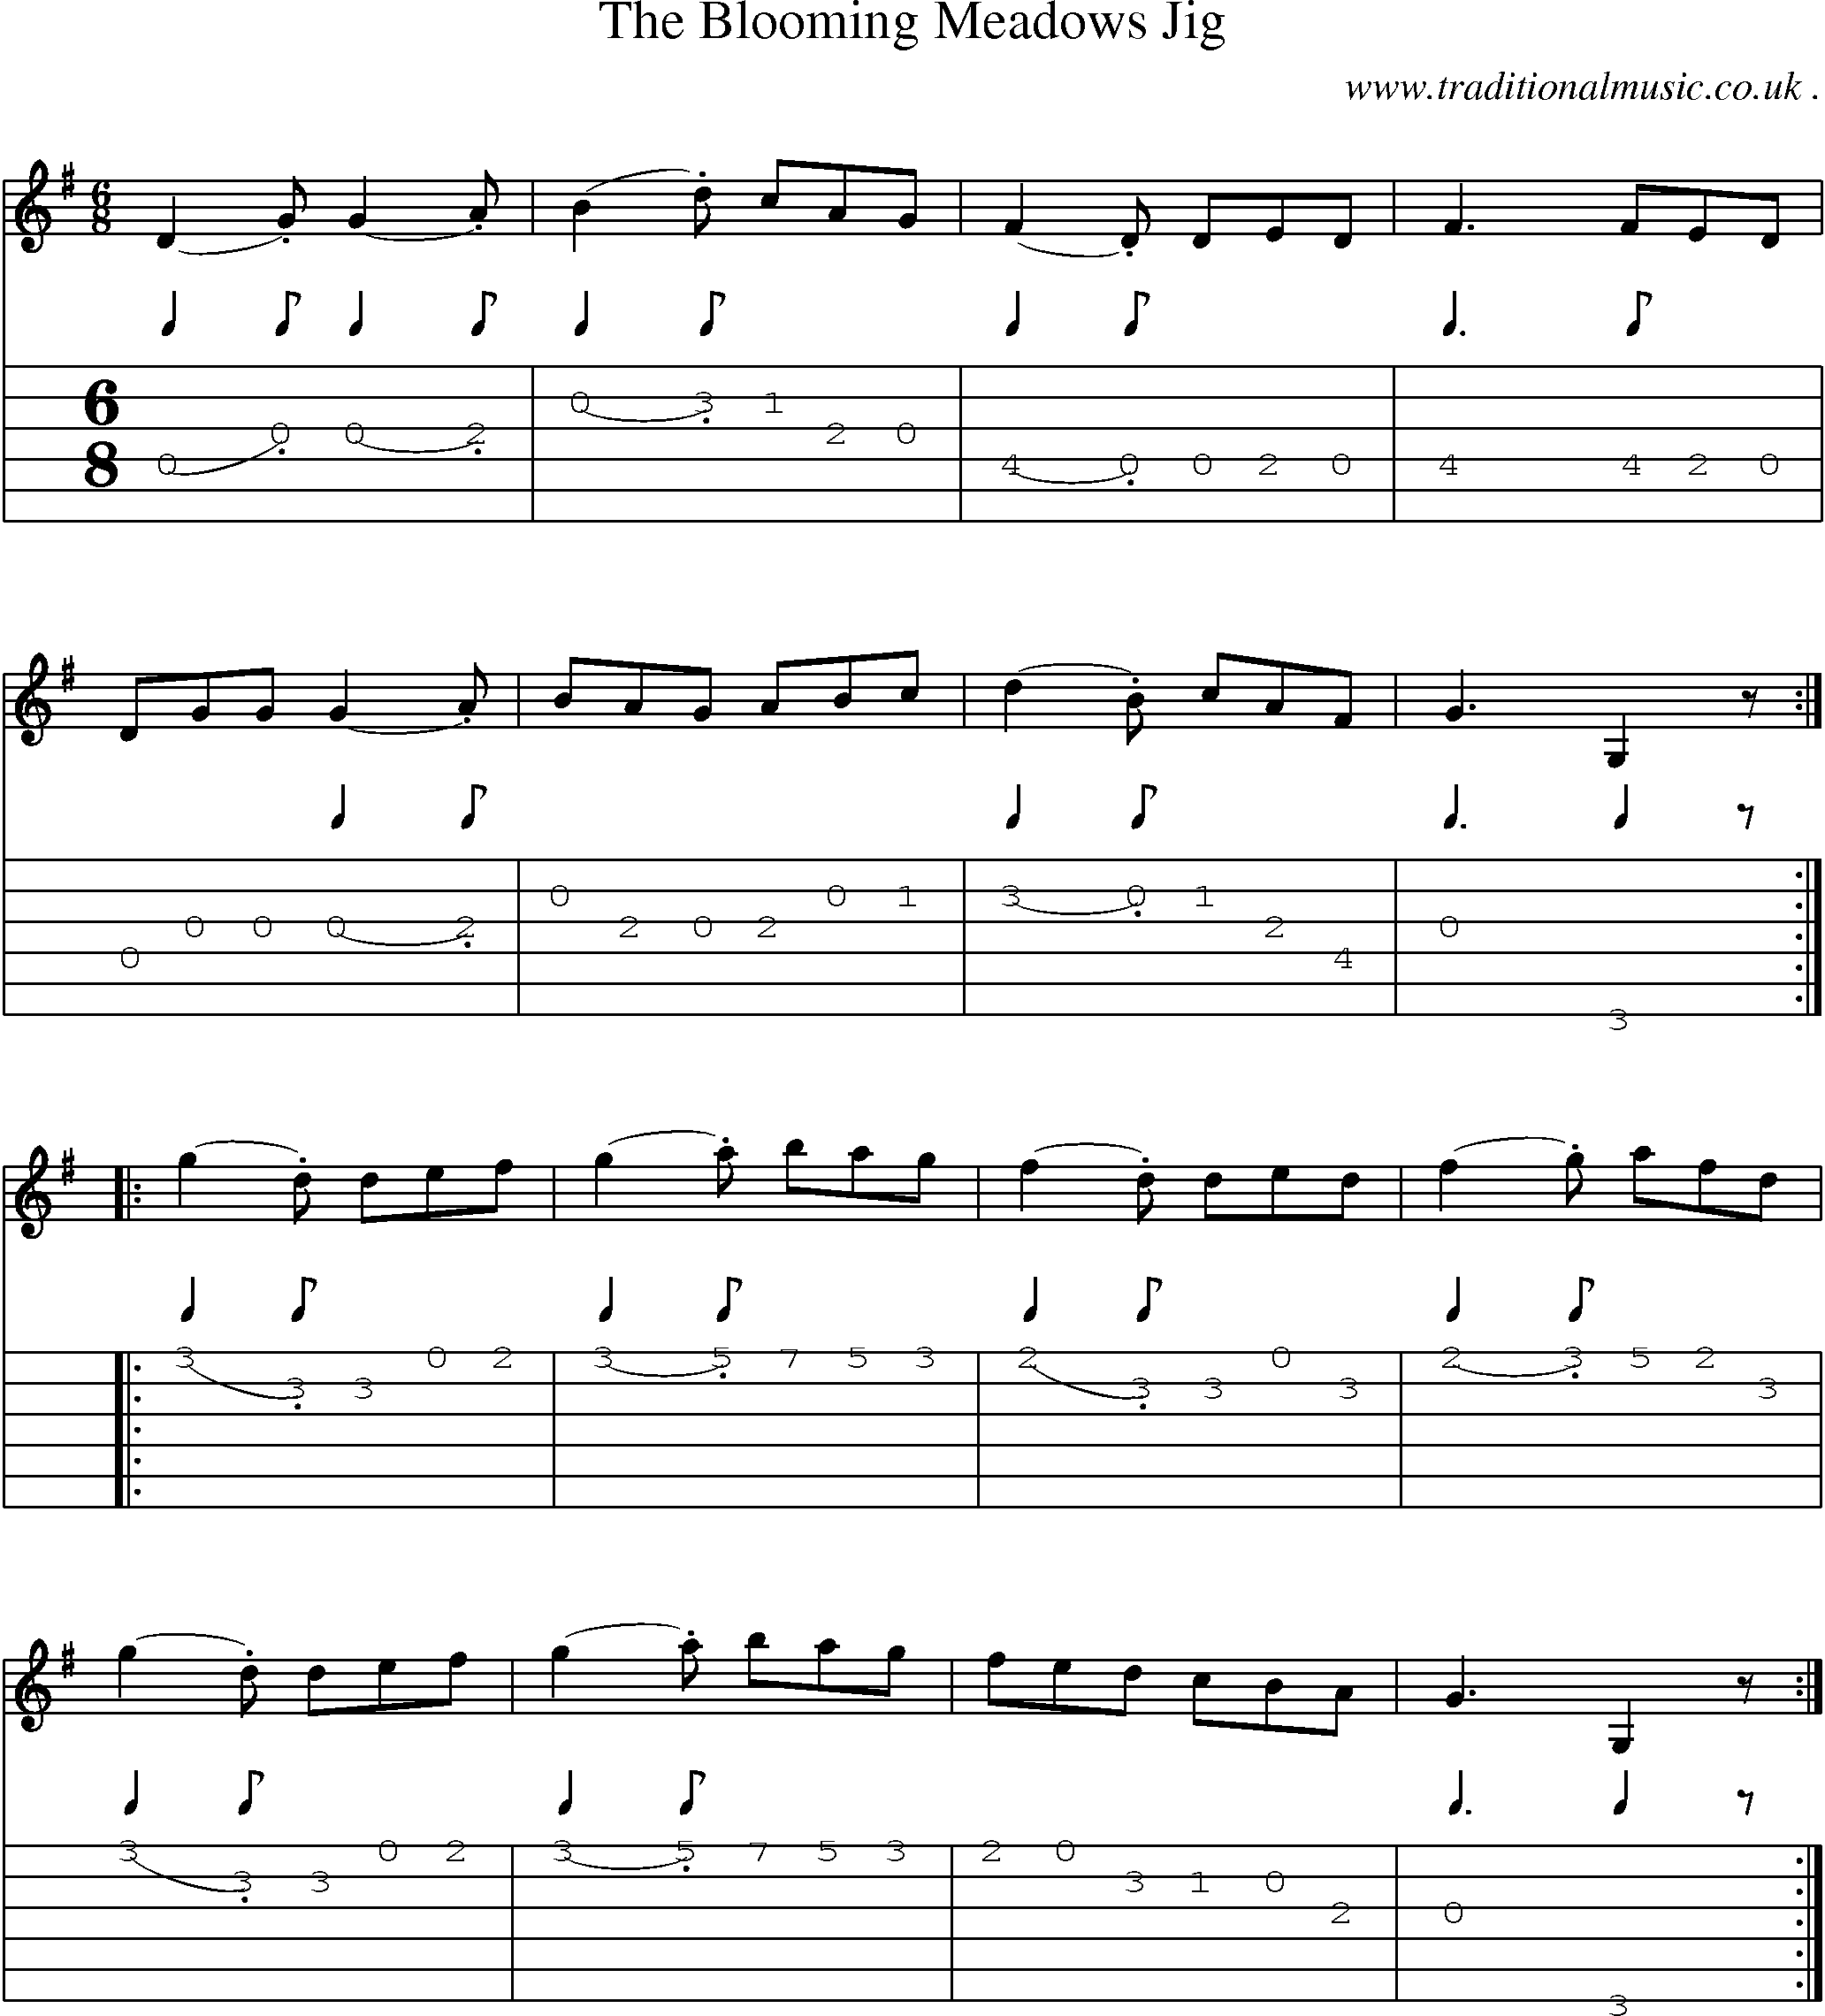 Sheet-Music and Guitar Tabs for The Blooming Meadows Jig